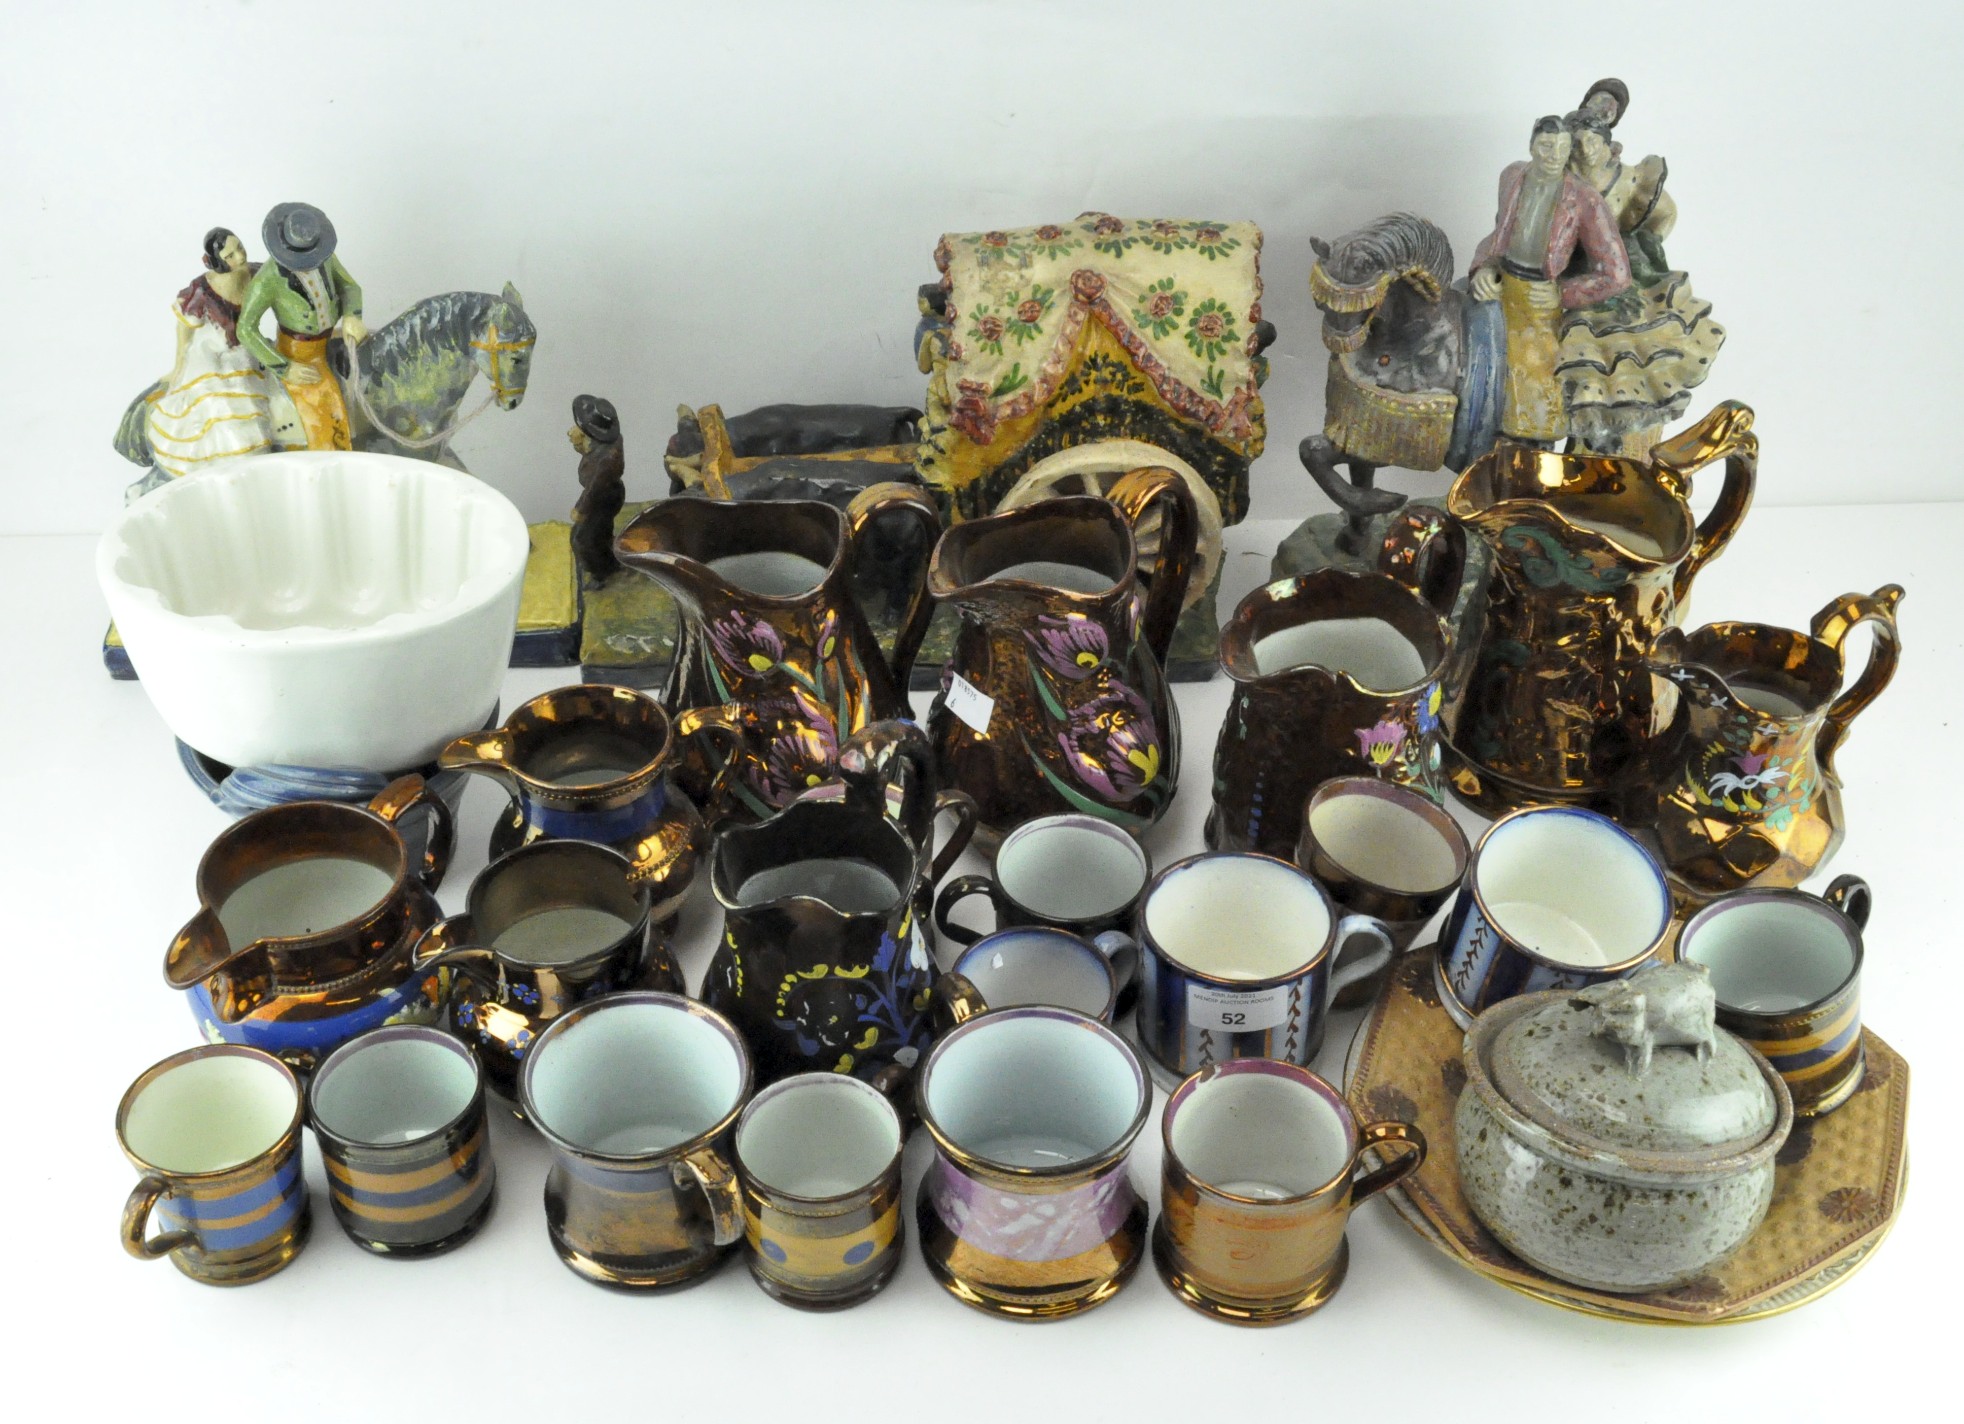 A large quantity of lustre ware ceramics, including pouring jugs, beakers and more,